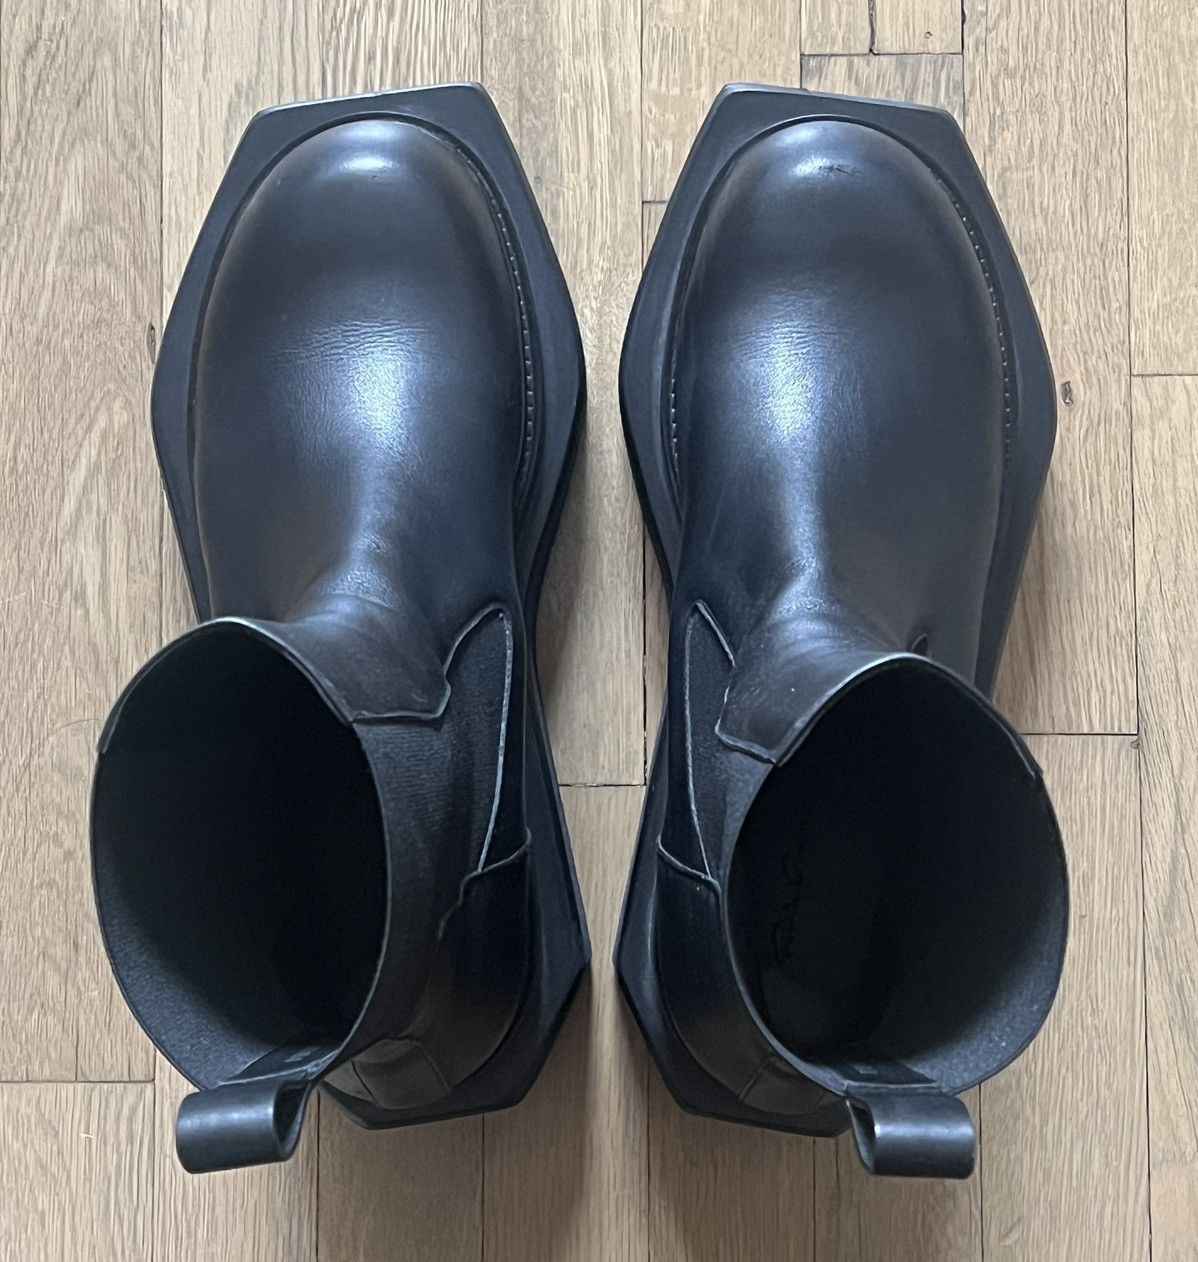 Rick Owens Beatle Turbo Cyclops Boots | Grailed